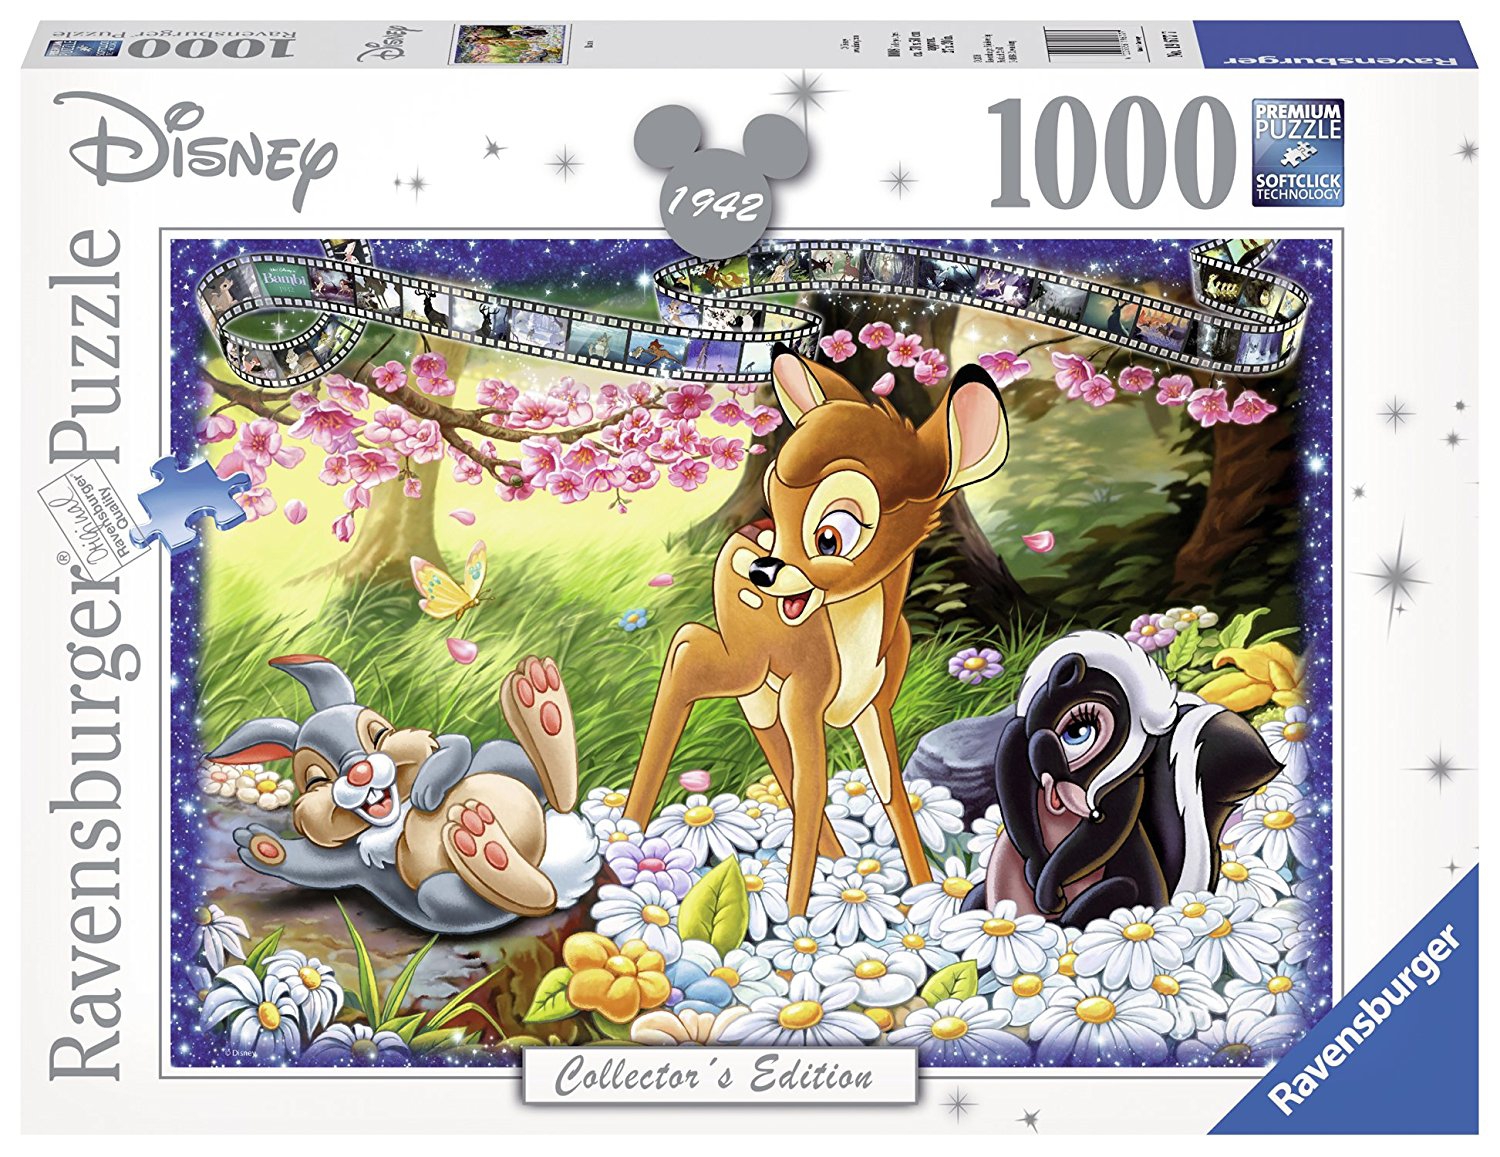 Disney Collector'S Edition ' Bambi' 1000 Piece Jigsaw Puzzle Game